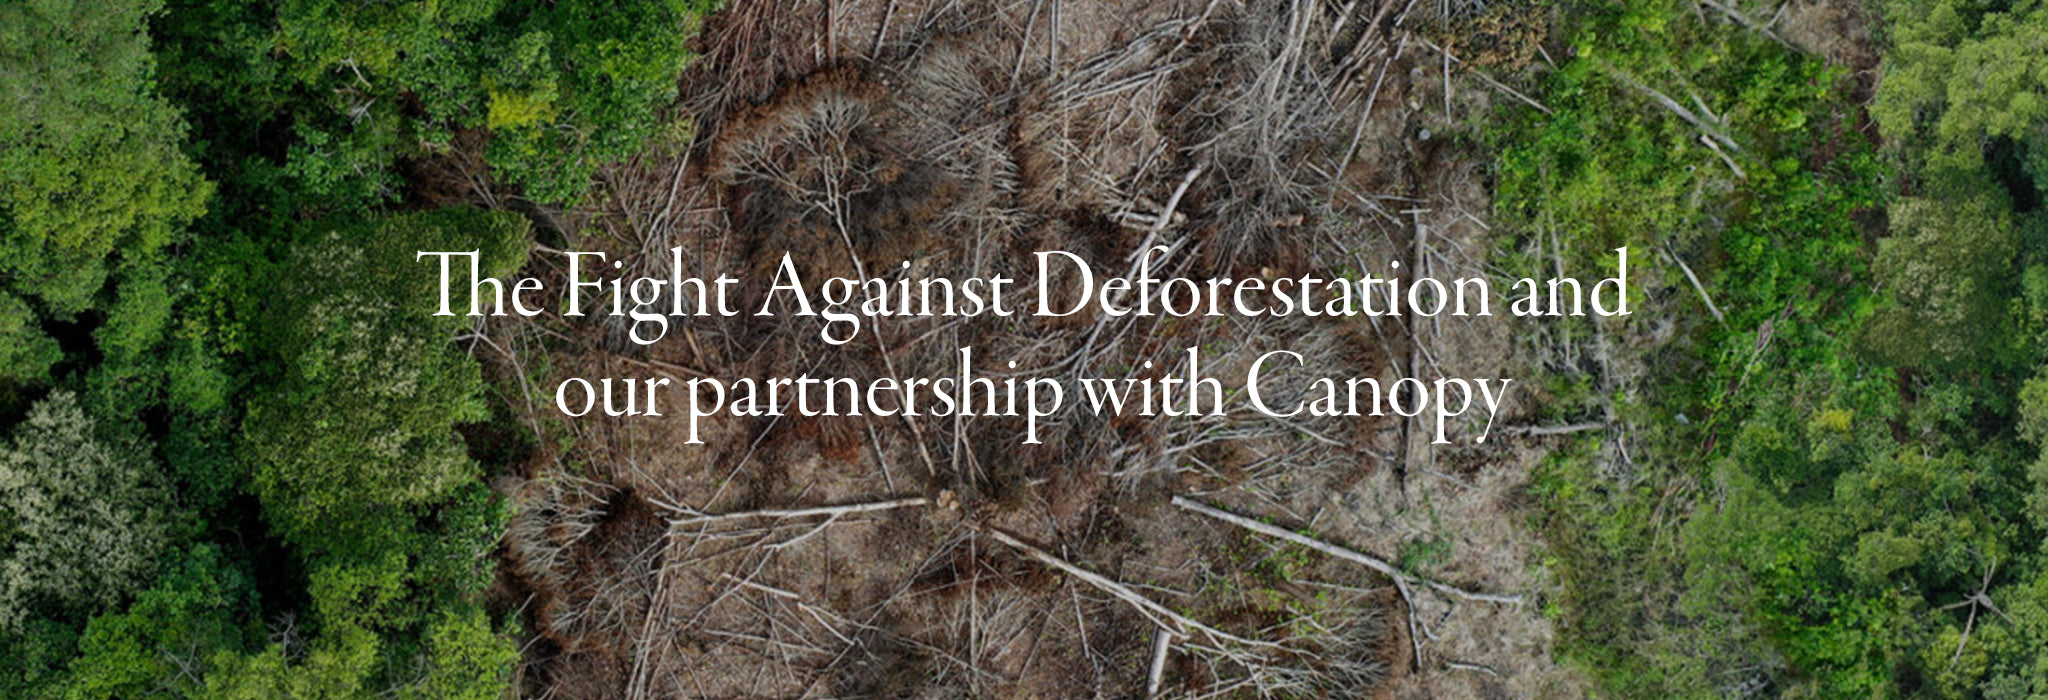 The Fight Against Deforestation and our partnership with Canopy